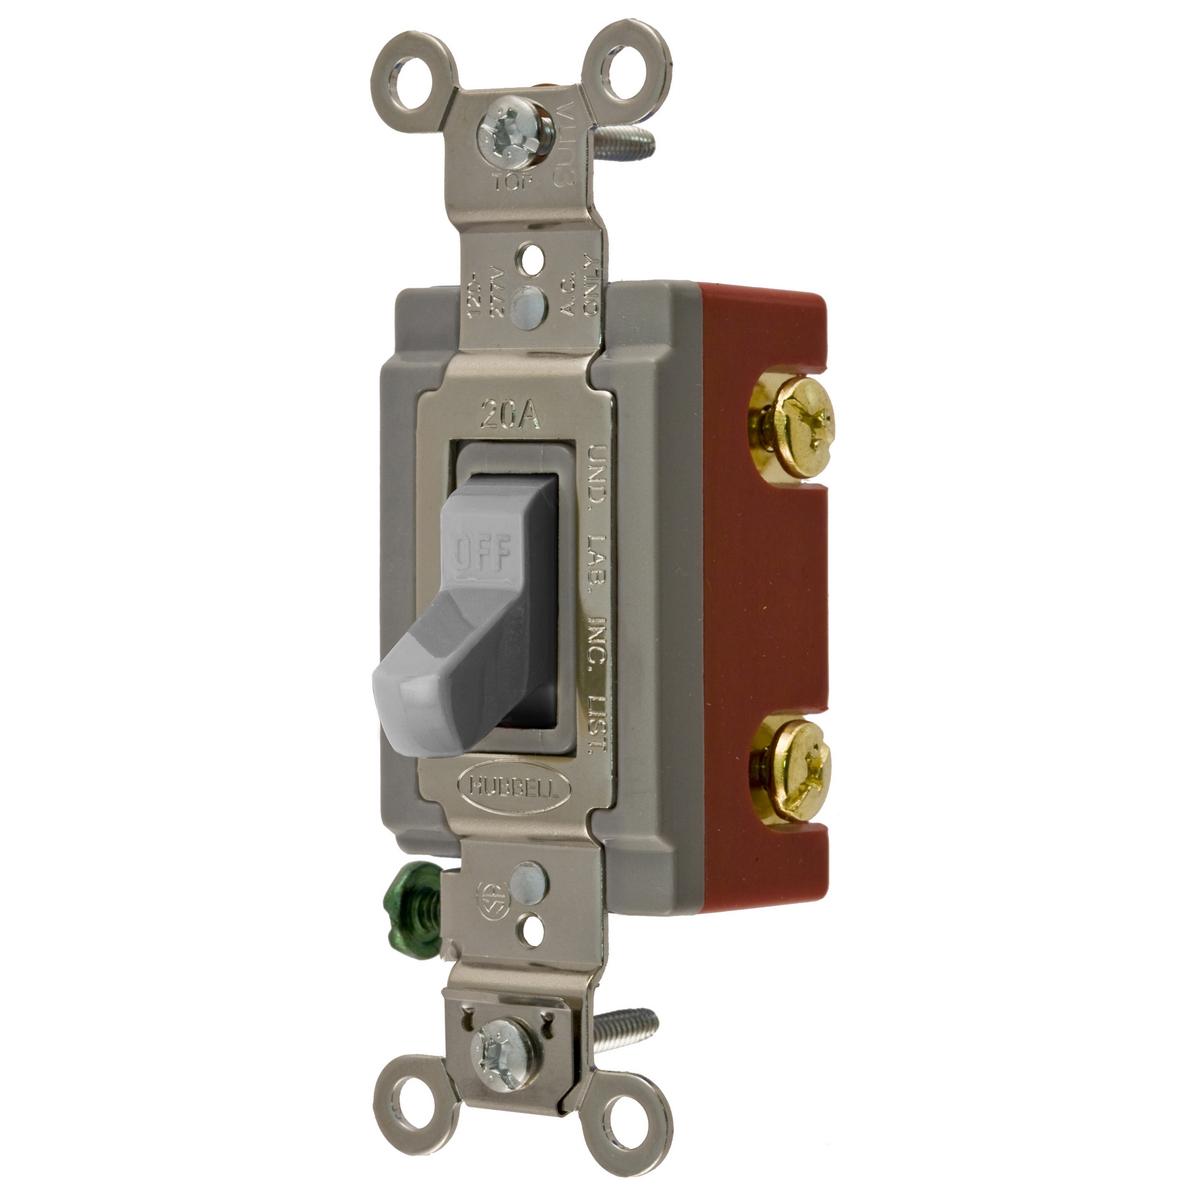 Hubbell HBL1221GY Switches and Lighting Controls, Extra Heavy Duty Industrial Grade, Toggle Switches, General Purpose AC, Single Pole, 20A 120/277V AC, Back and Side Wired, Gray Toggle  ; Large brass binding head screws with deep slots ; Abuse resistant nylon toggle ; Stri